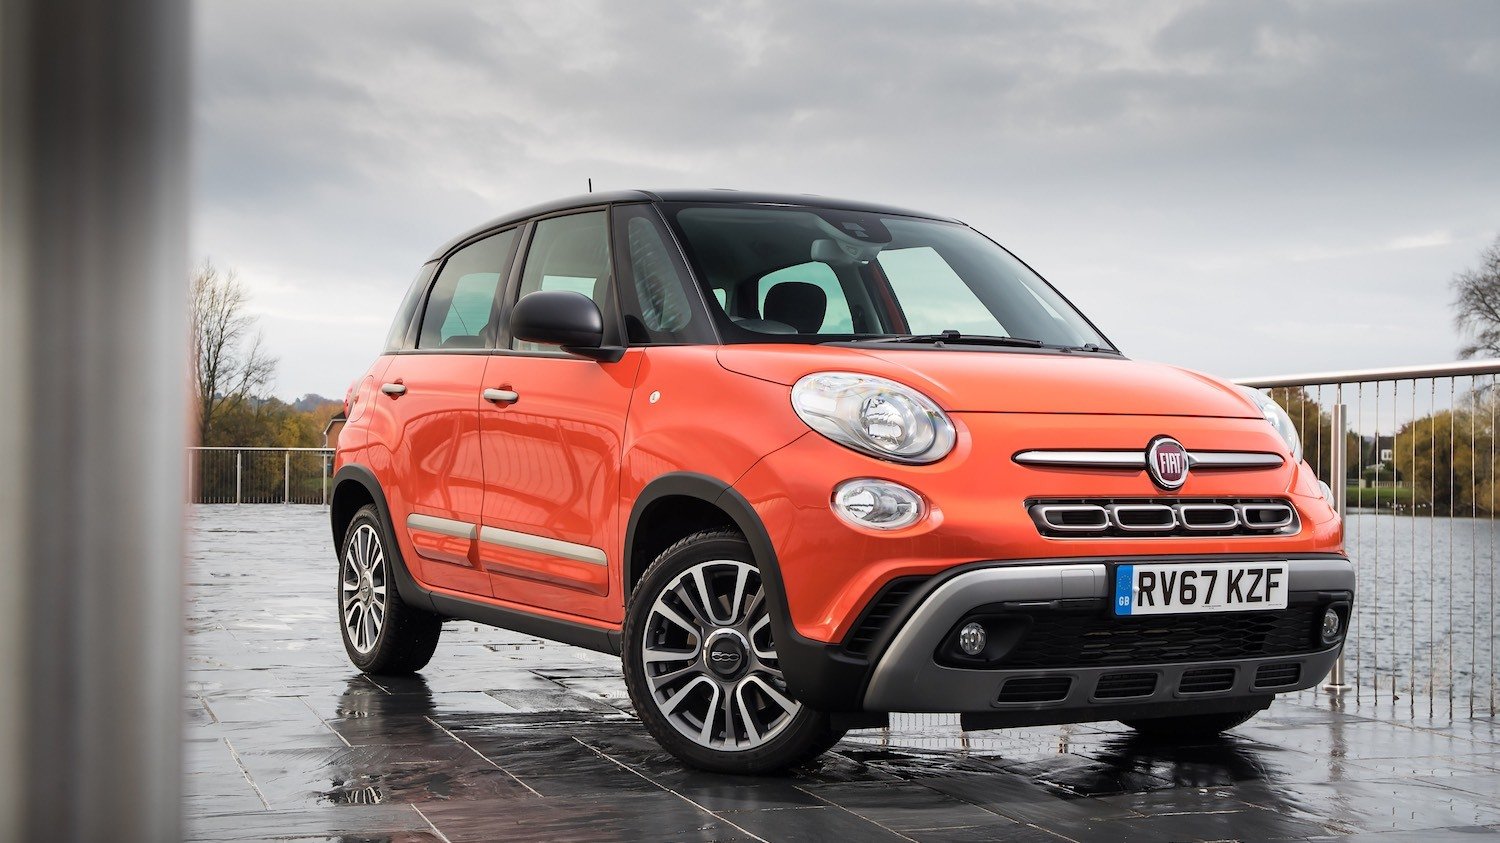 The Fiat 500L reviewed by Tom Scanlan for Drive 2